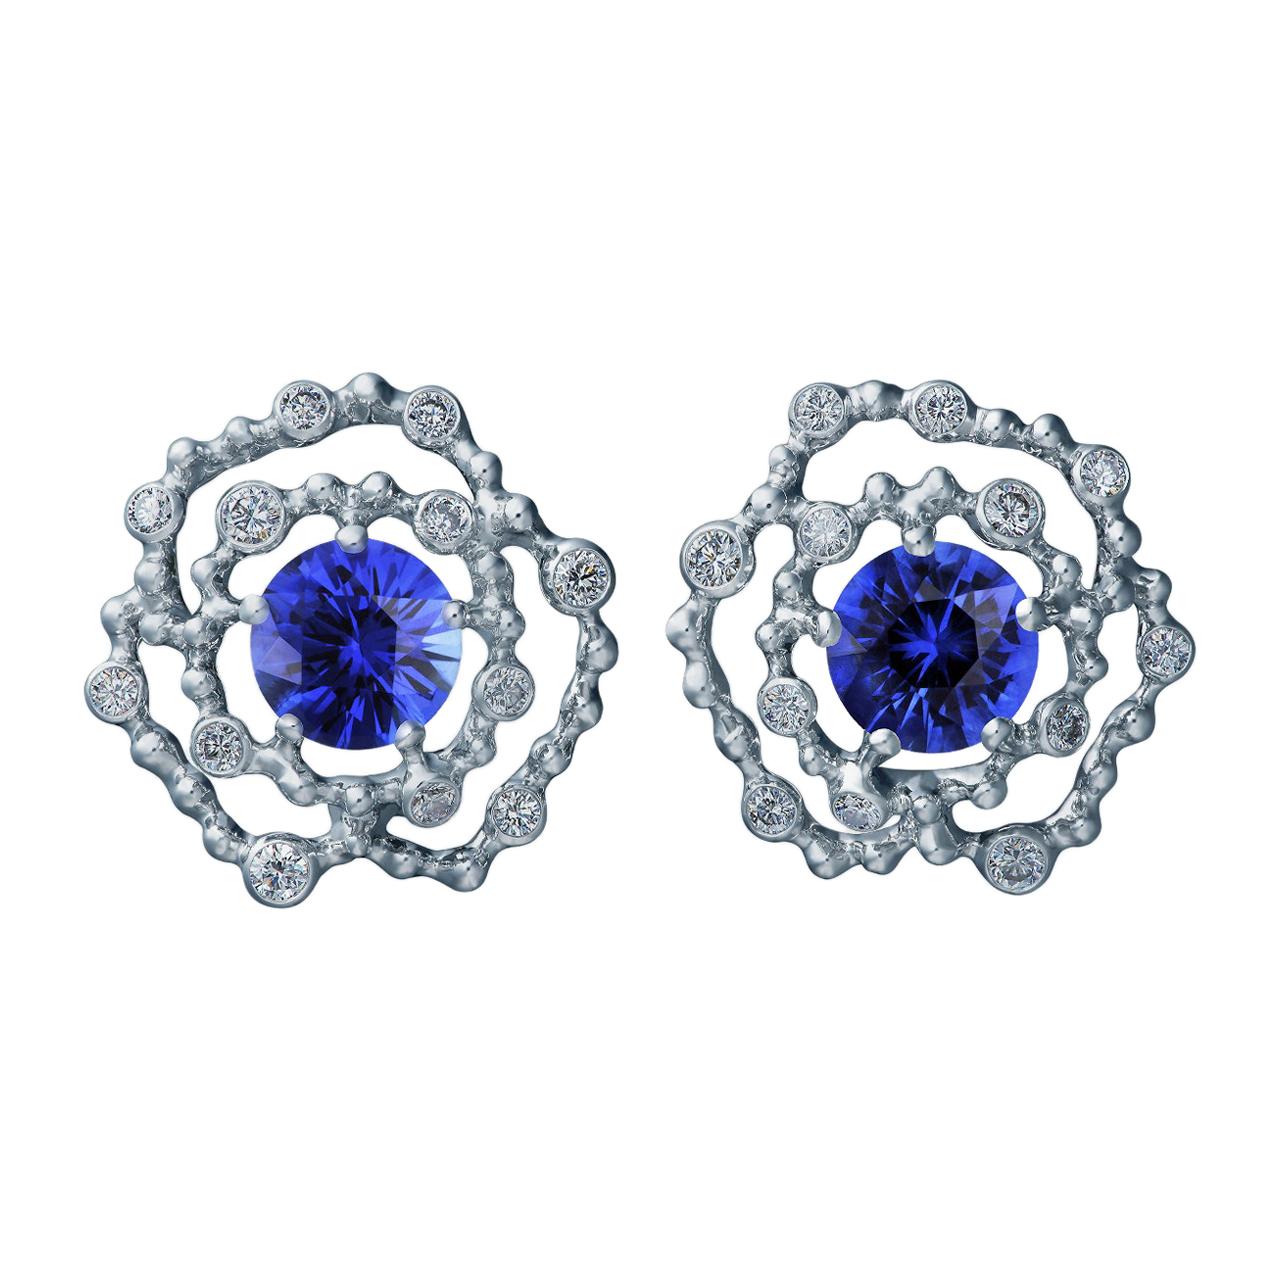 18 Karat White Gold Earrings with 2.46 Carat Sapphires and 0.43 Carat Diamonds For Sale